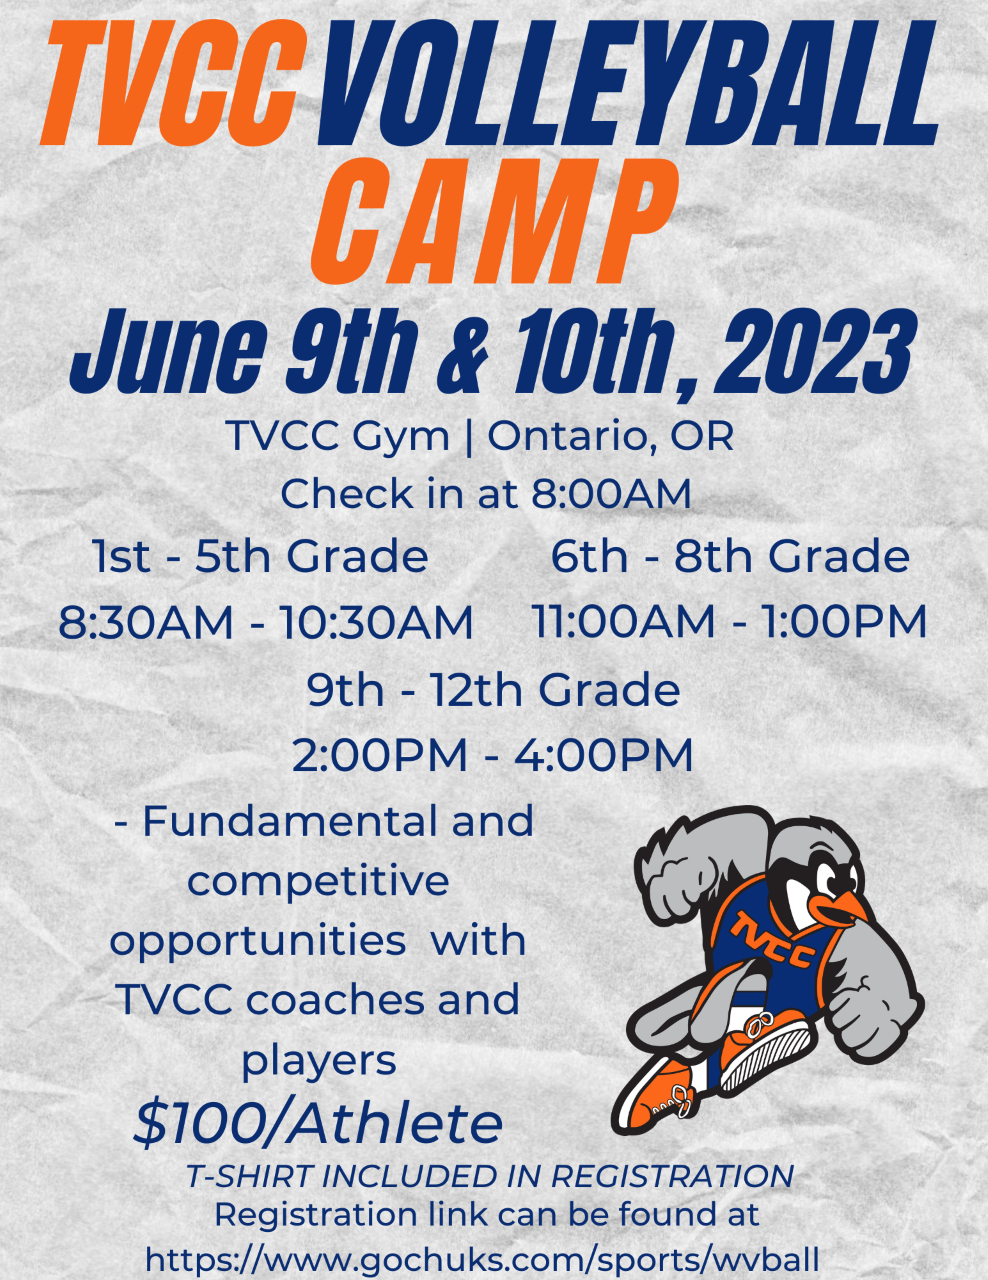 Chukar Volleyball Set to Host Camp for 1st-8th Graders in 2023